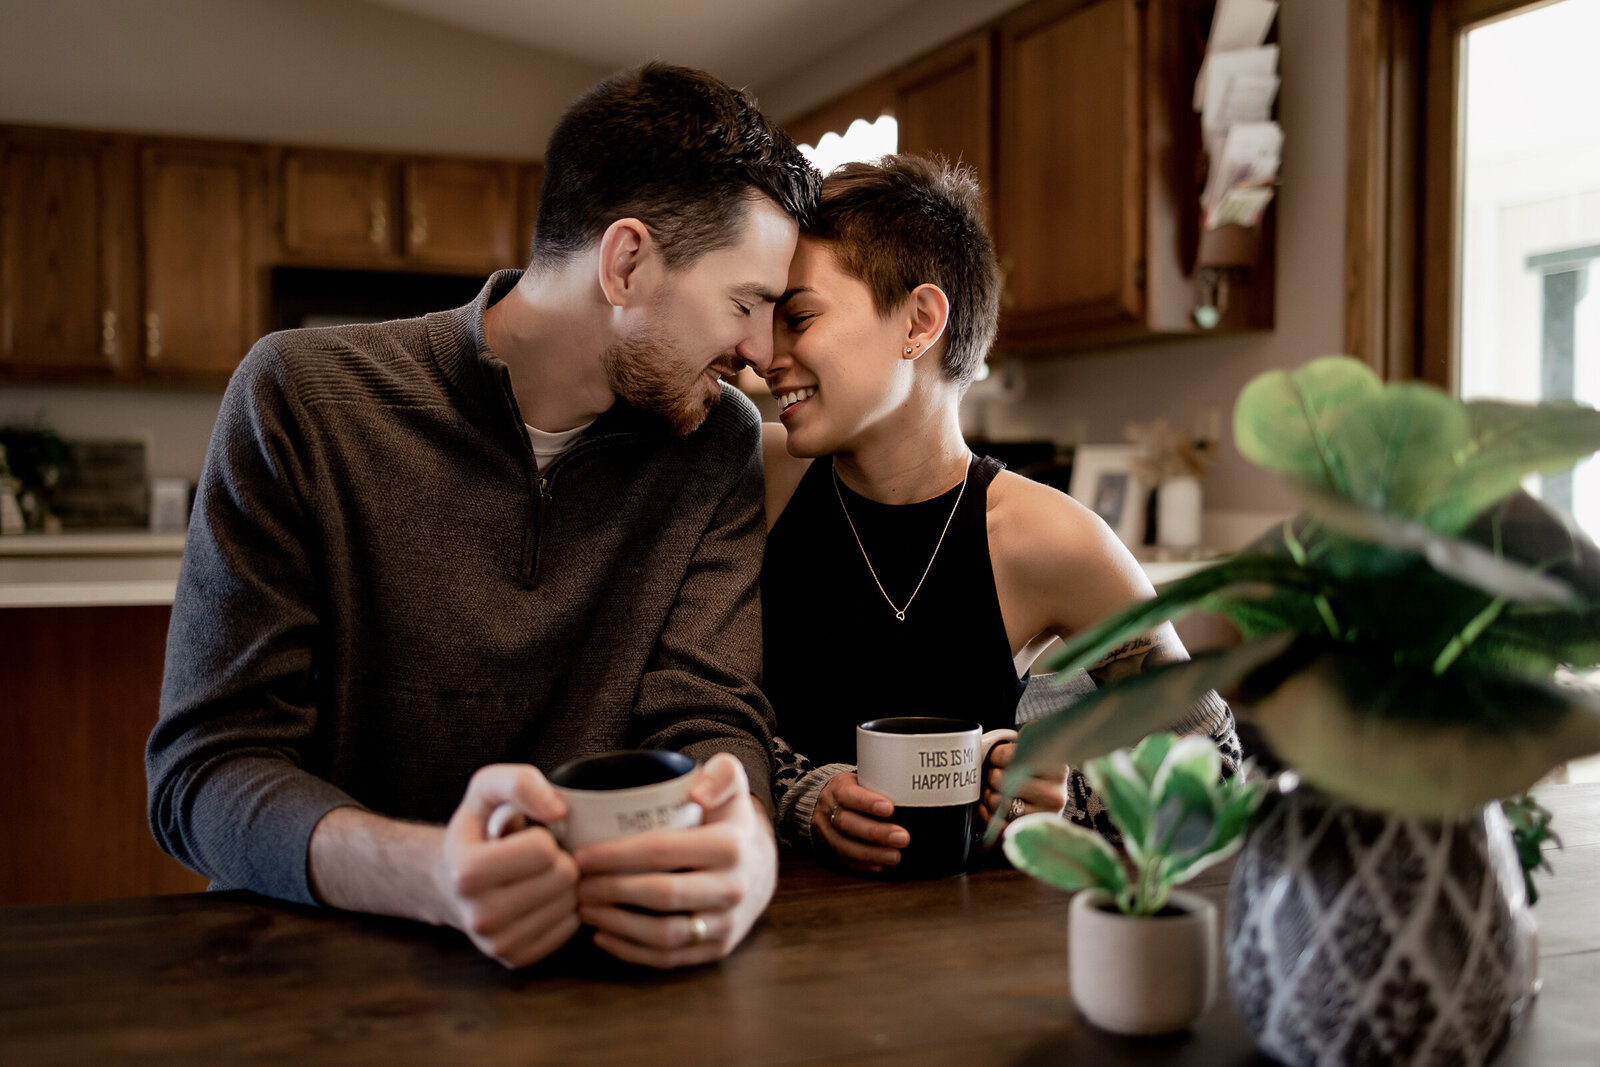 Affectionate couple sharing a cup of coffee in their home